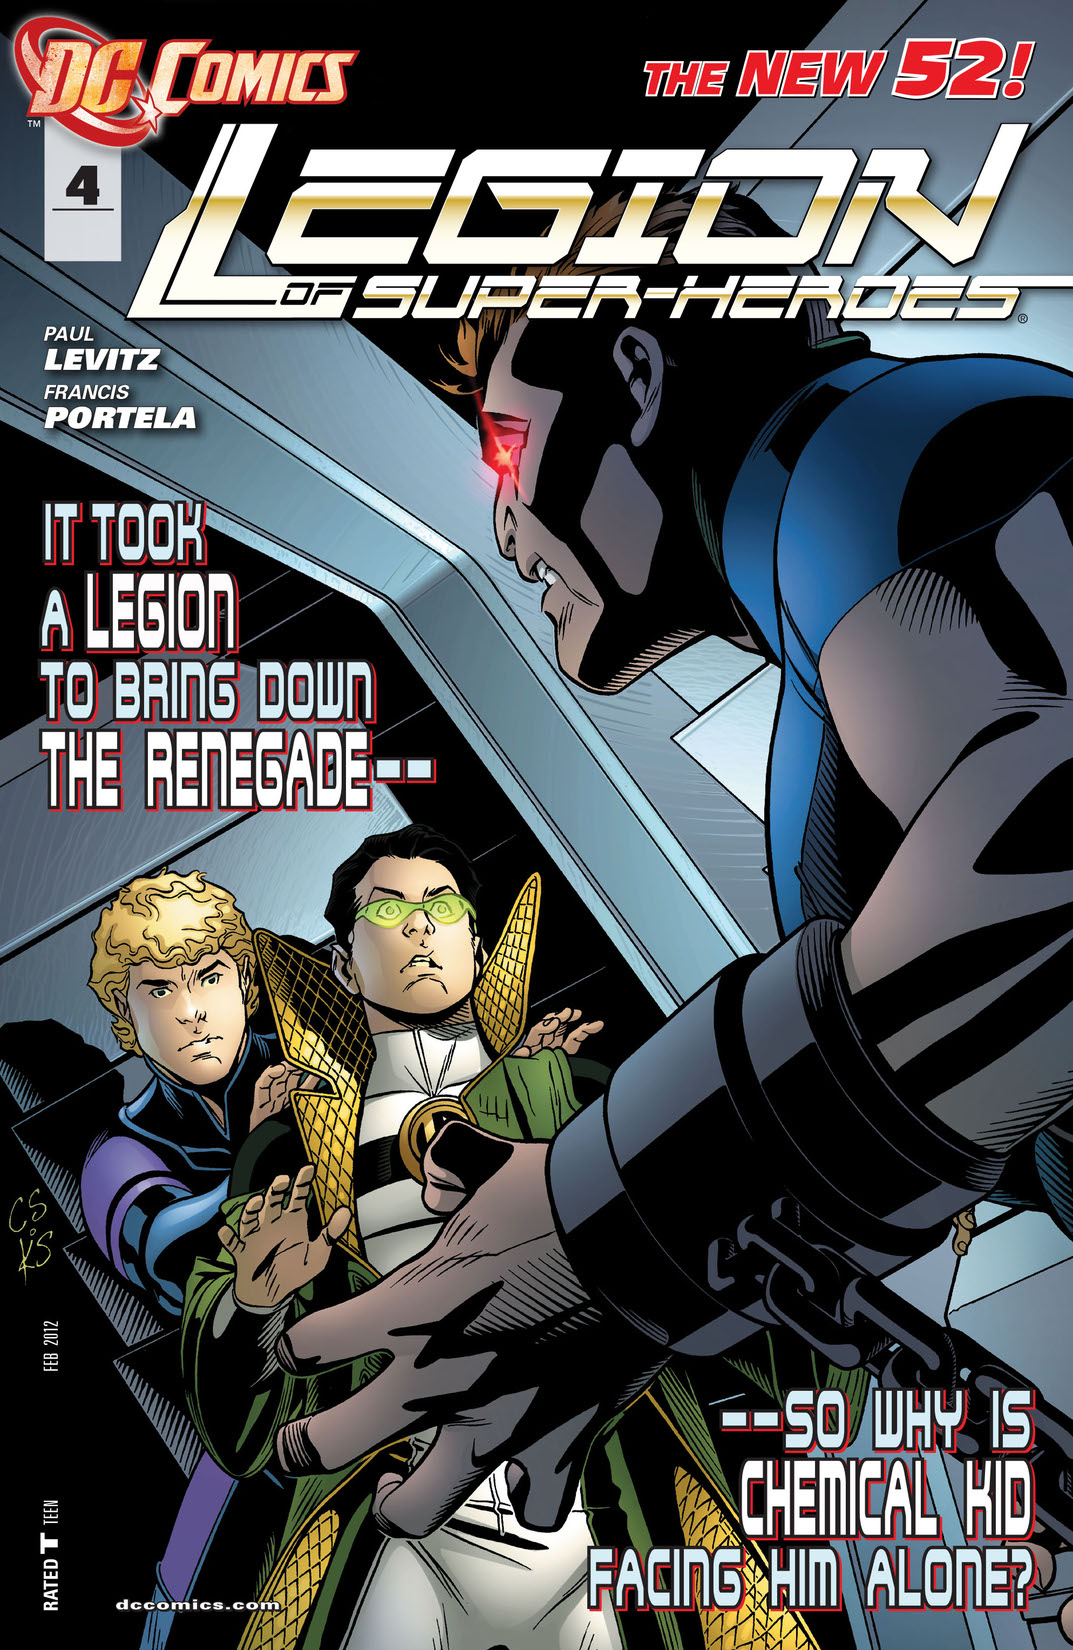 Legion of Super-Heroes (2011-) #4 preview images